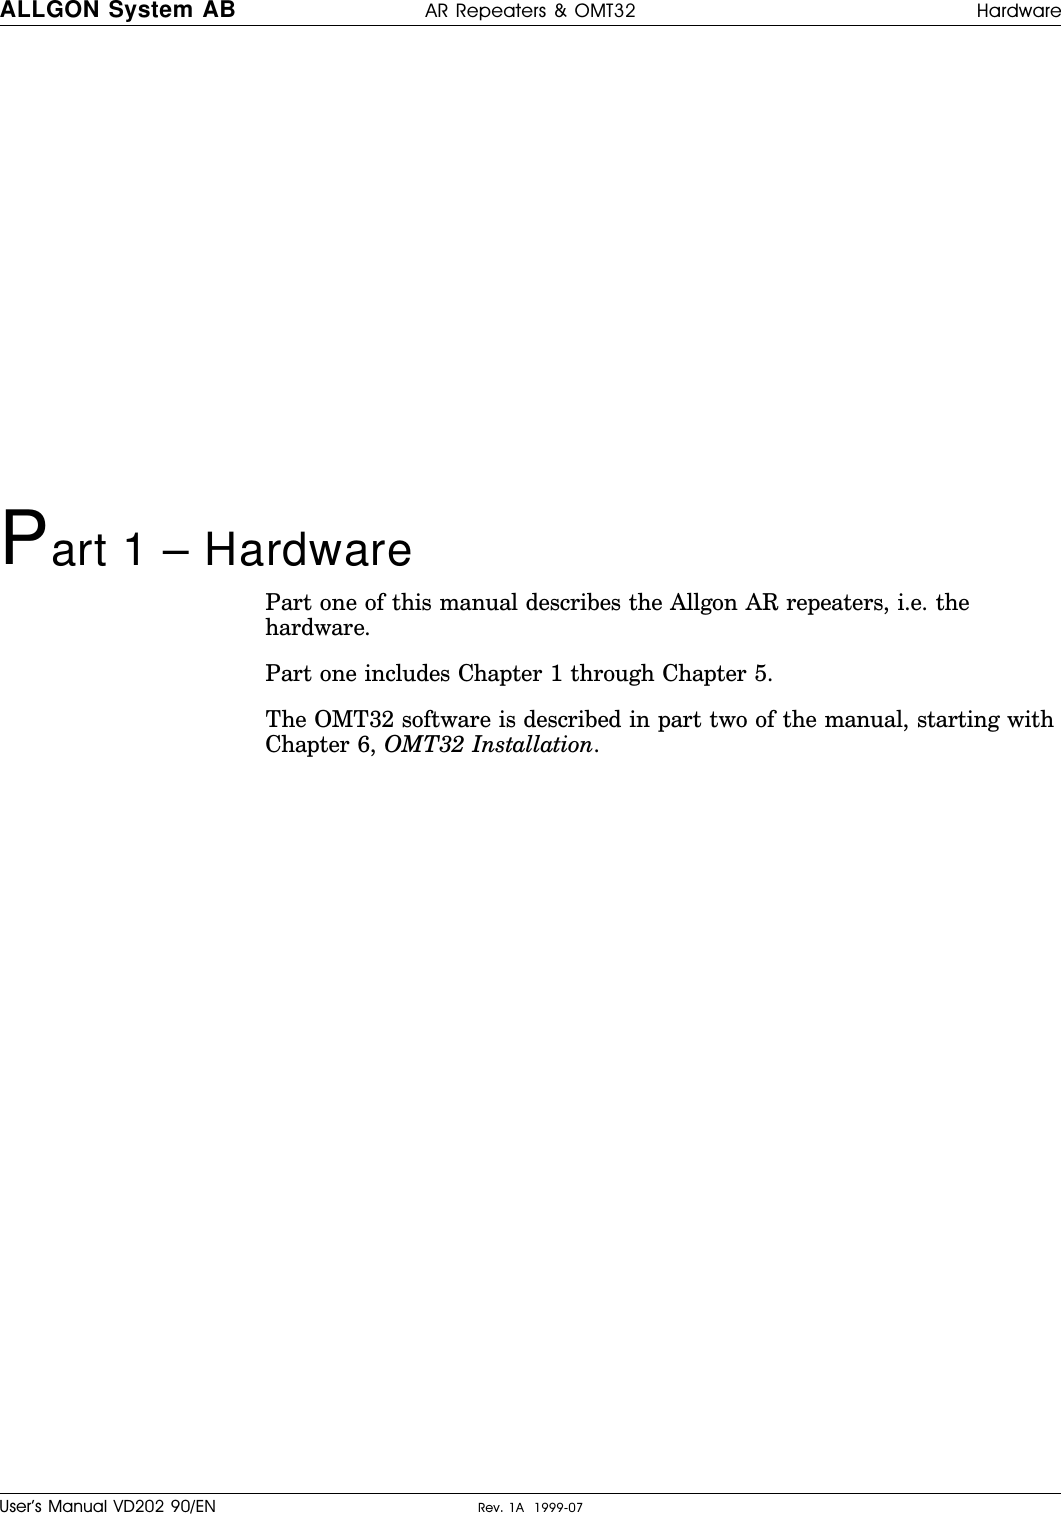 Part 1 – HardwarePart one of this manual describes the Allgon AR repeaters, i.e. thehardware.Part one includes Chapter 1 through Chapter 5.The OMT32 software is described in part two of the manual, starting withChapter 6, OMT32 Installation.ALLGON System AB AR Repeaters &amp; OMT32 HardwareUser’s Manual VD202 90/EN Rev. 1A  1999-07